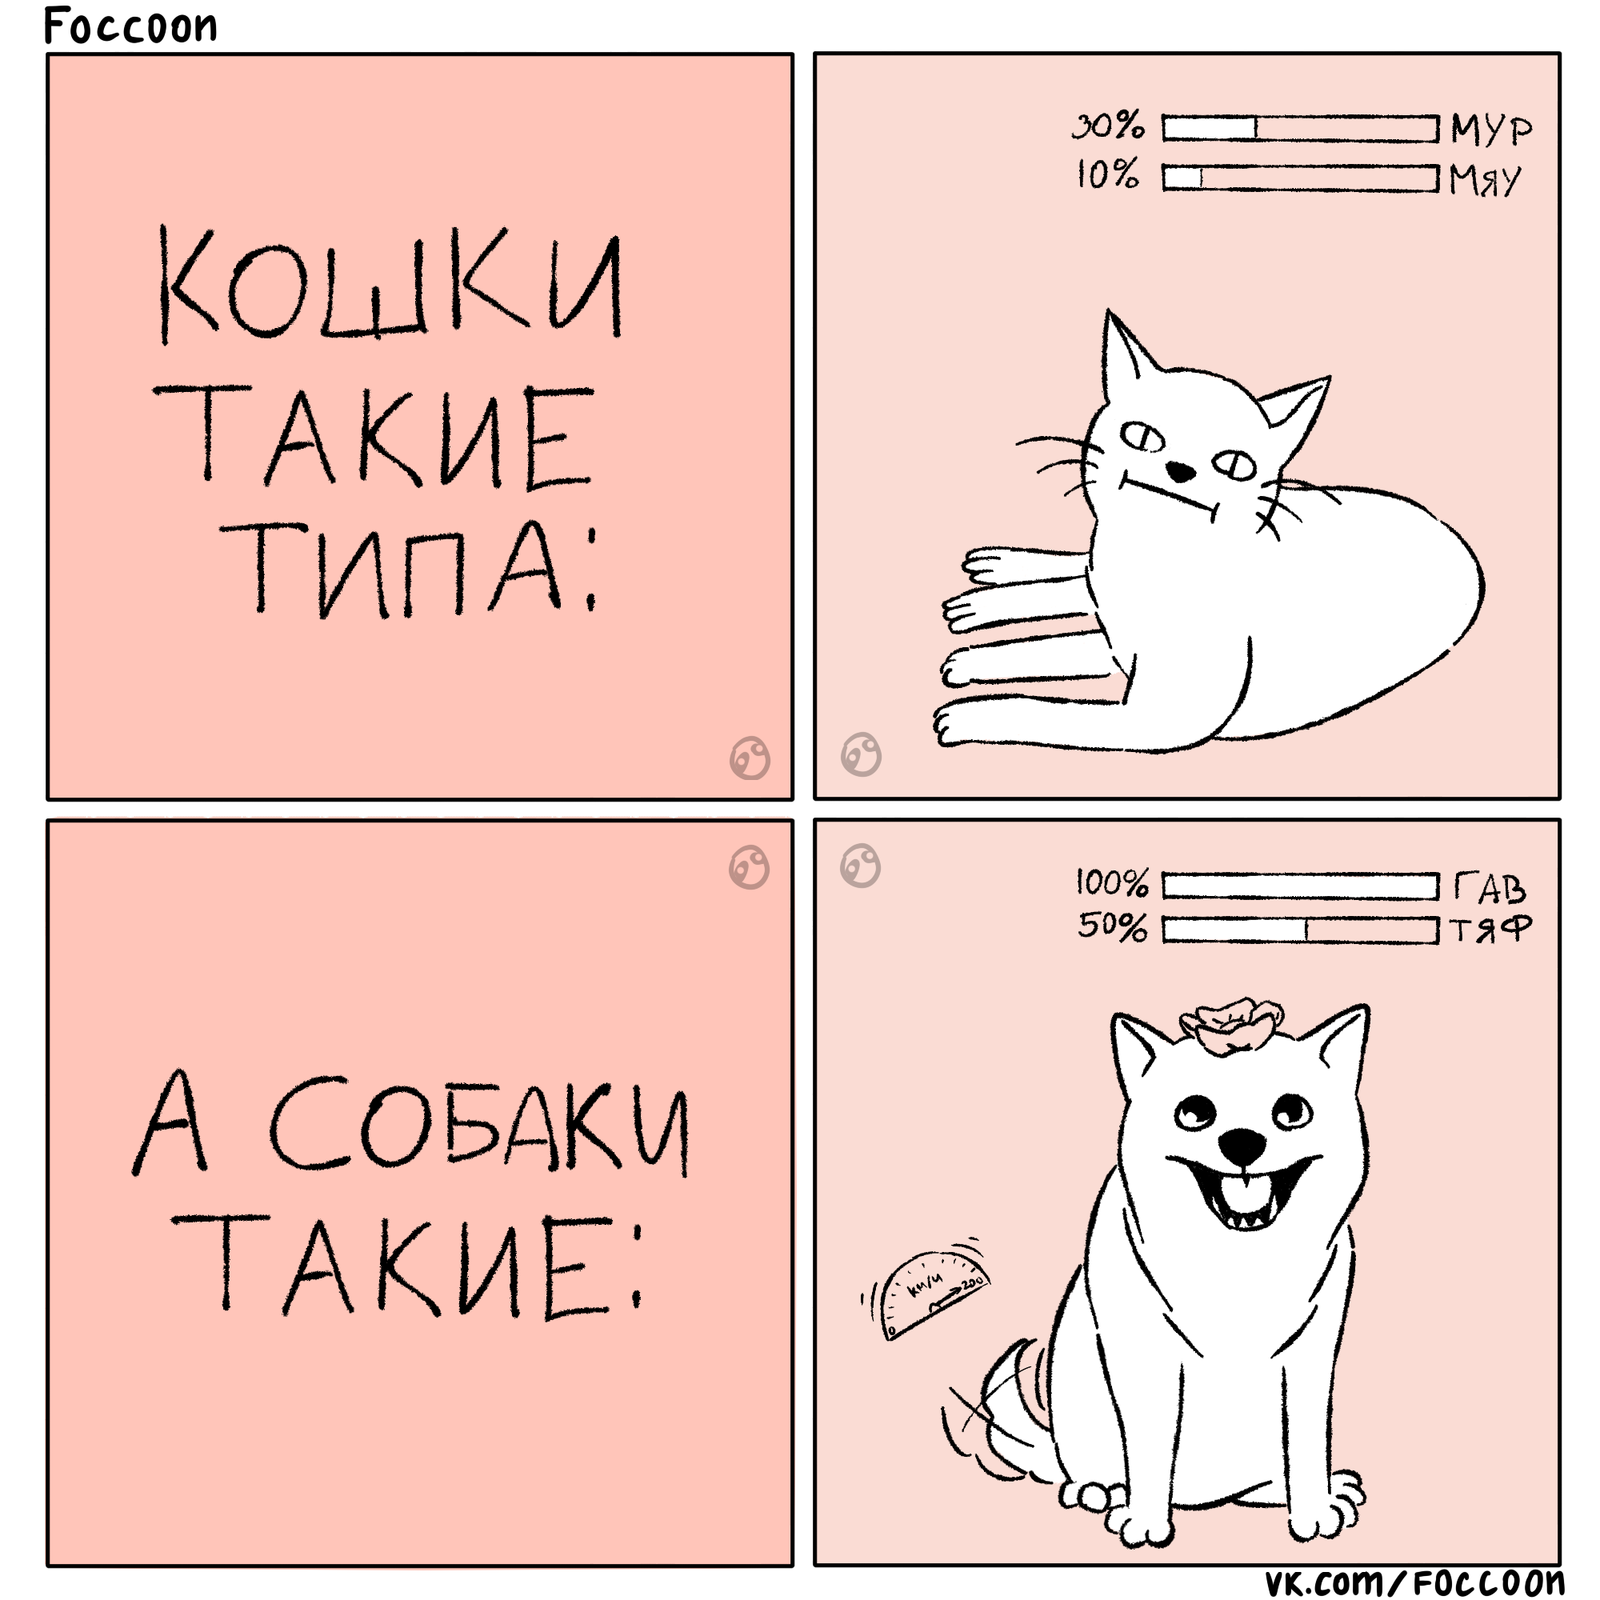 Cats/dogs - My, Foccoon, cat, Dog, Cats and dogs together, Comics, Milota, Animals